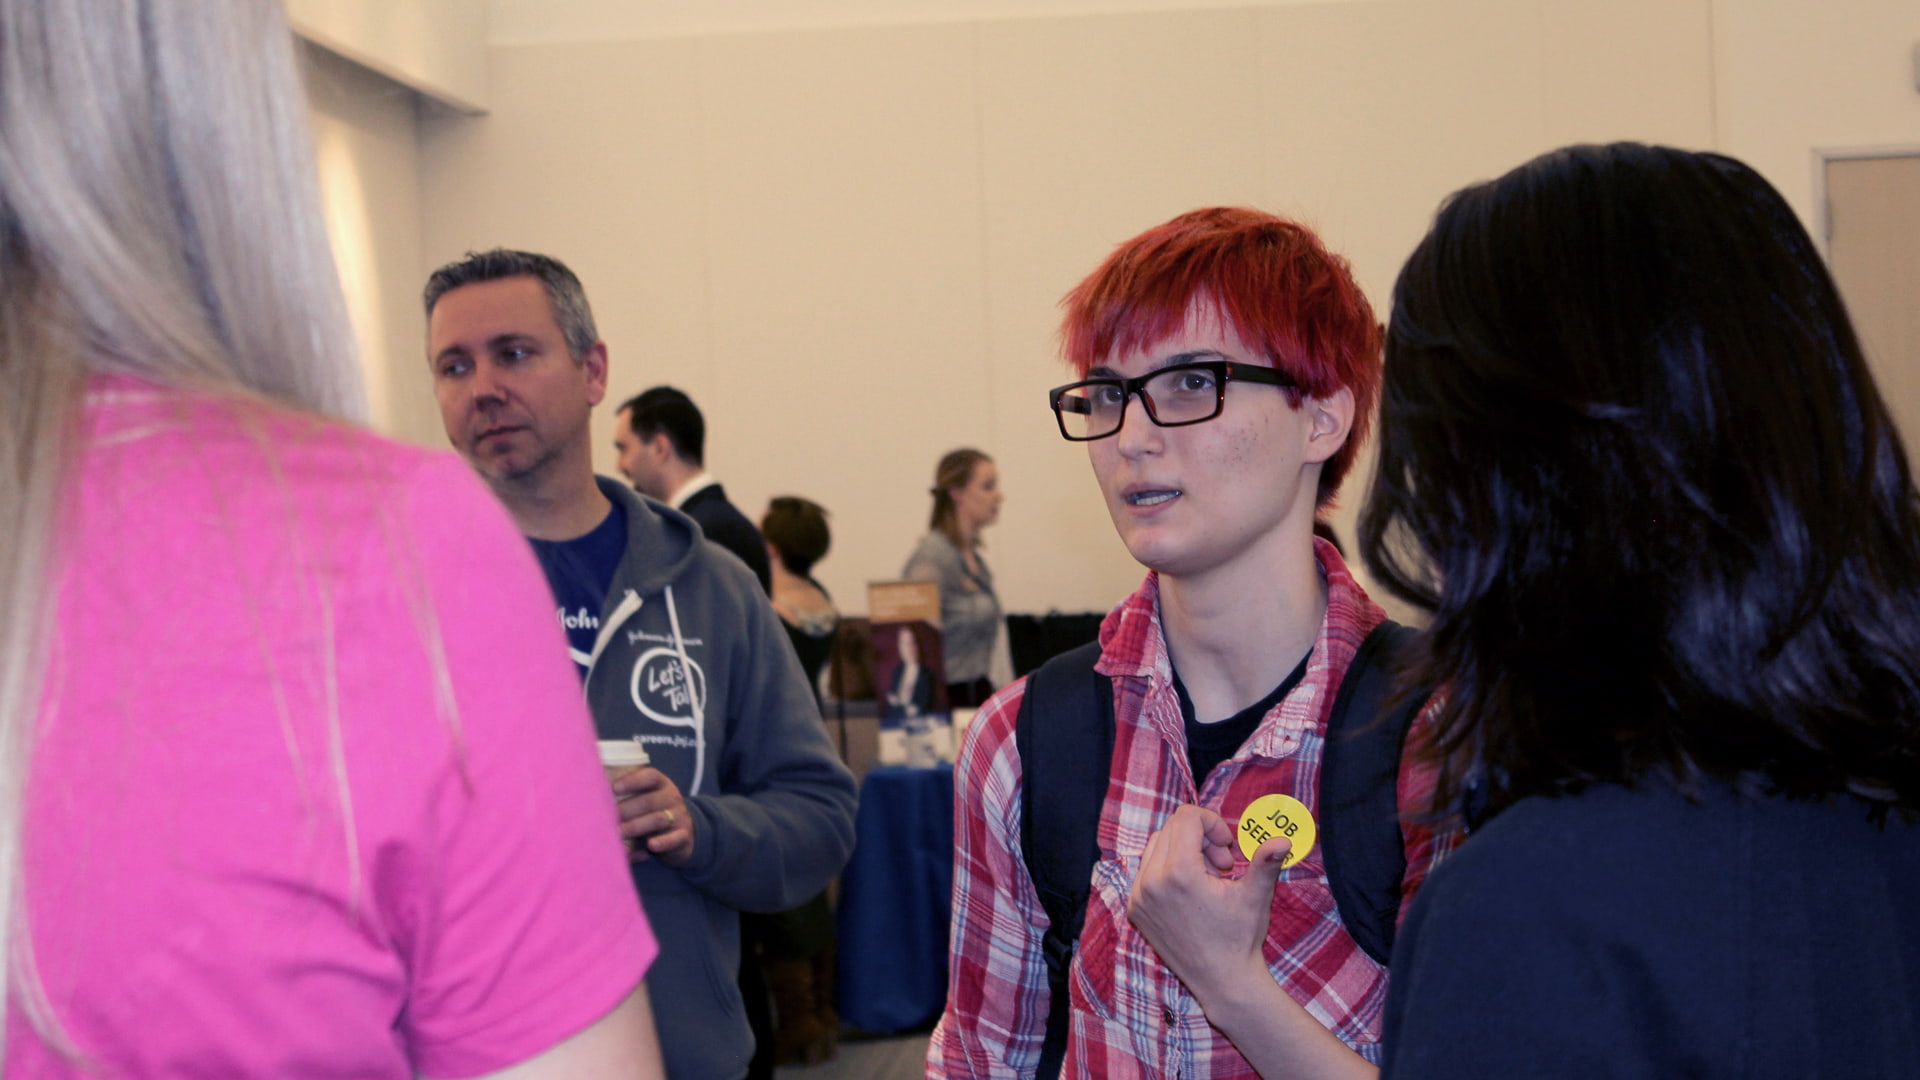 Students talk with employers at Technology Career Fair, October 2018.